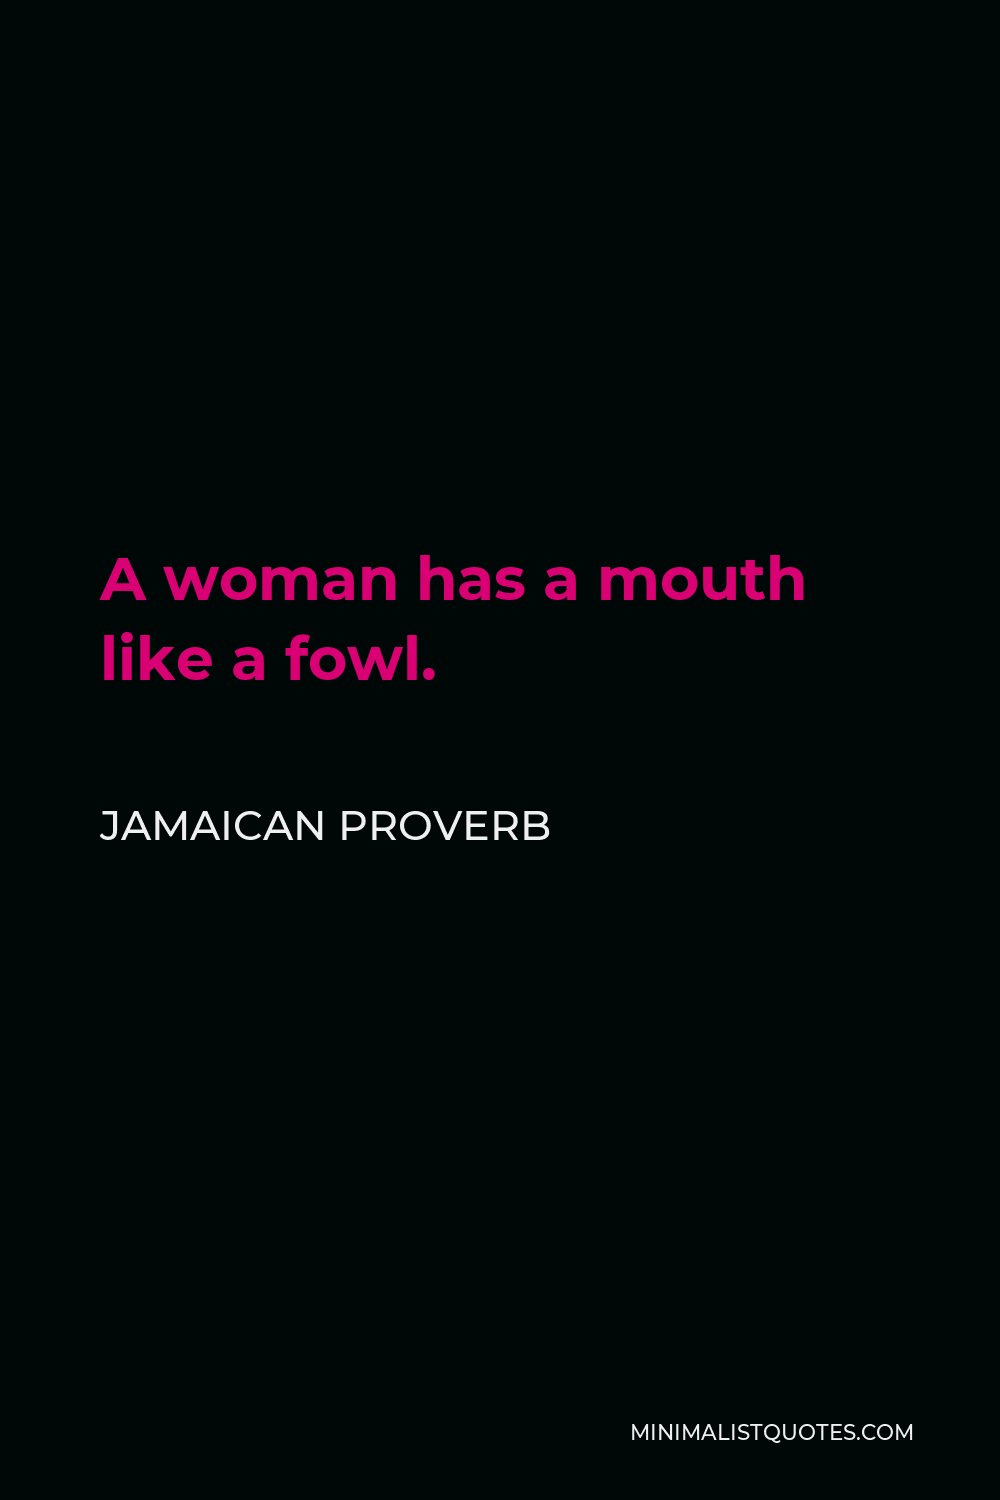 Jamaican Proverb Quote - A woman has a mouth like a fowl.